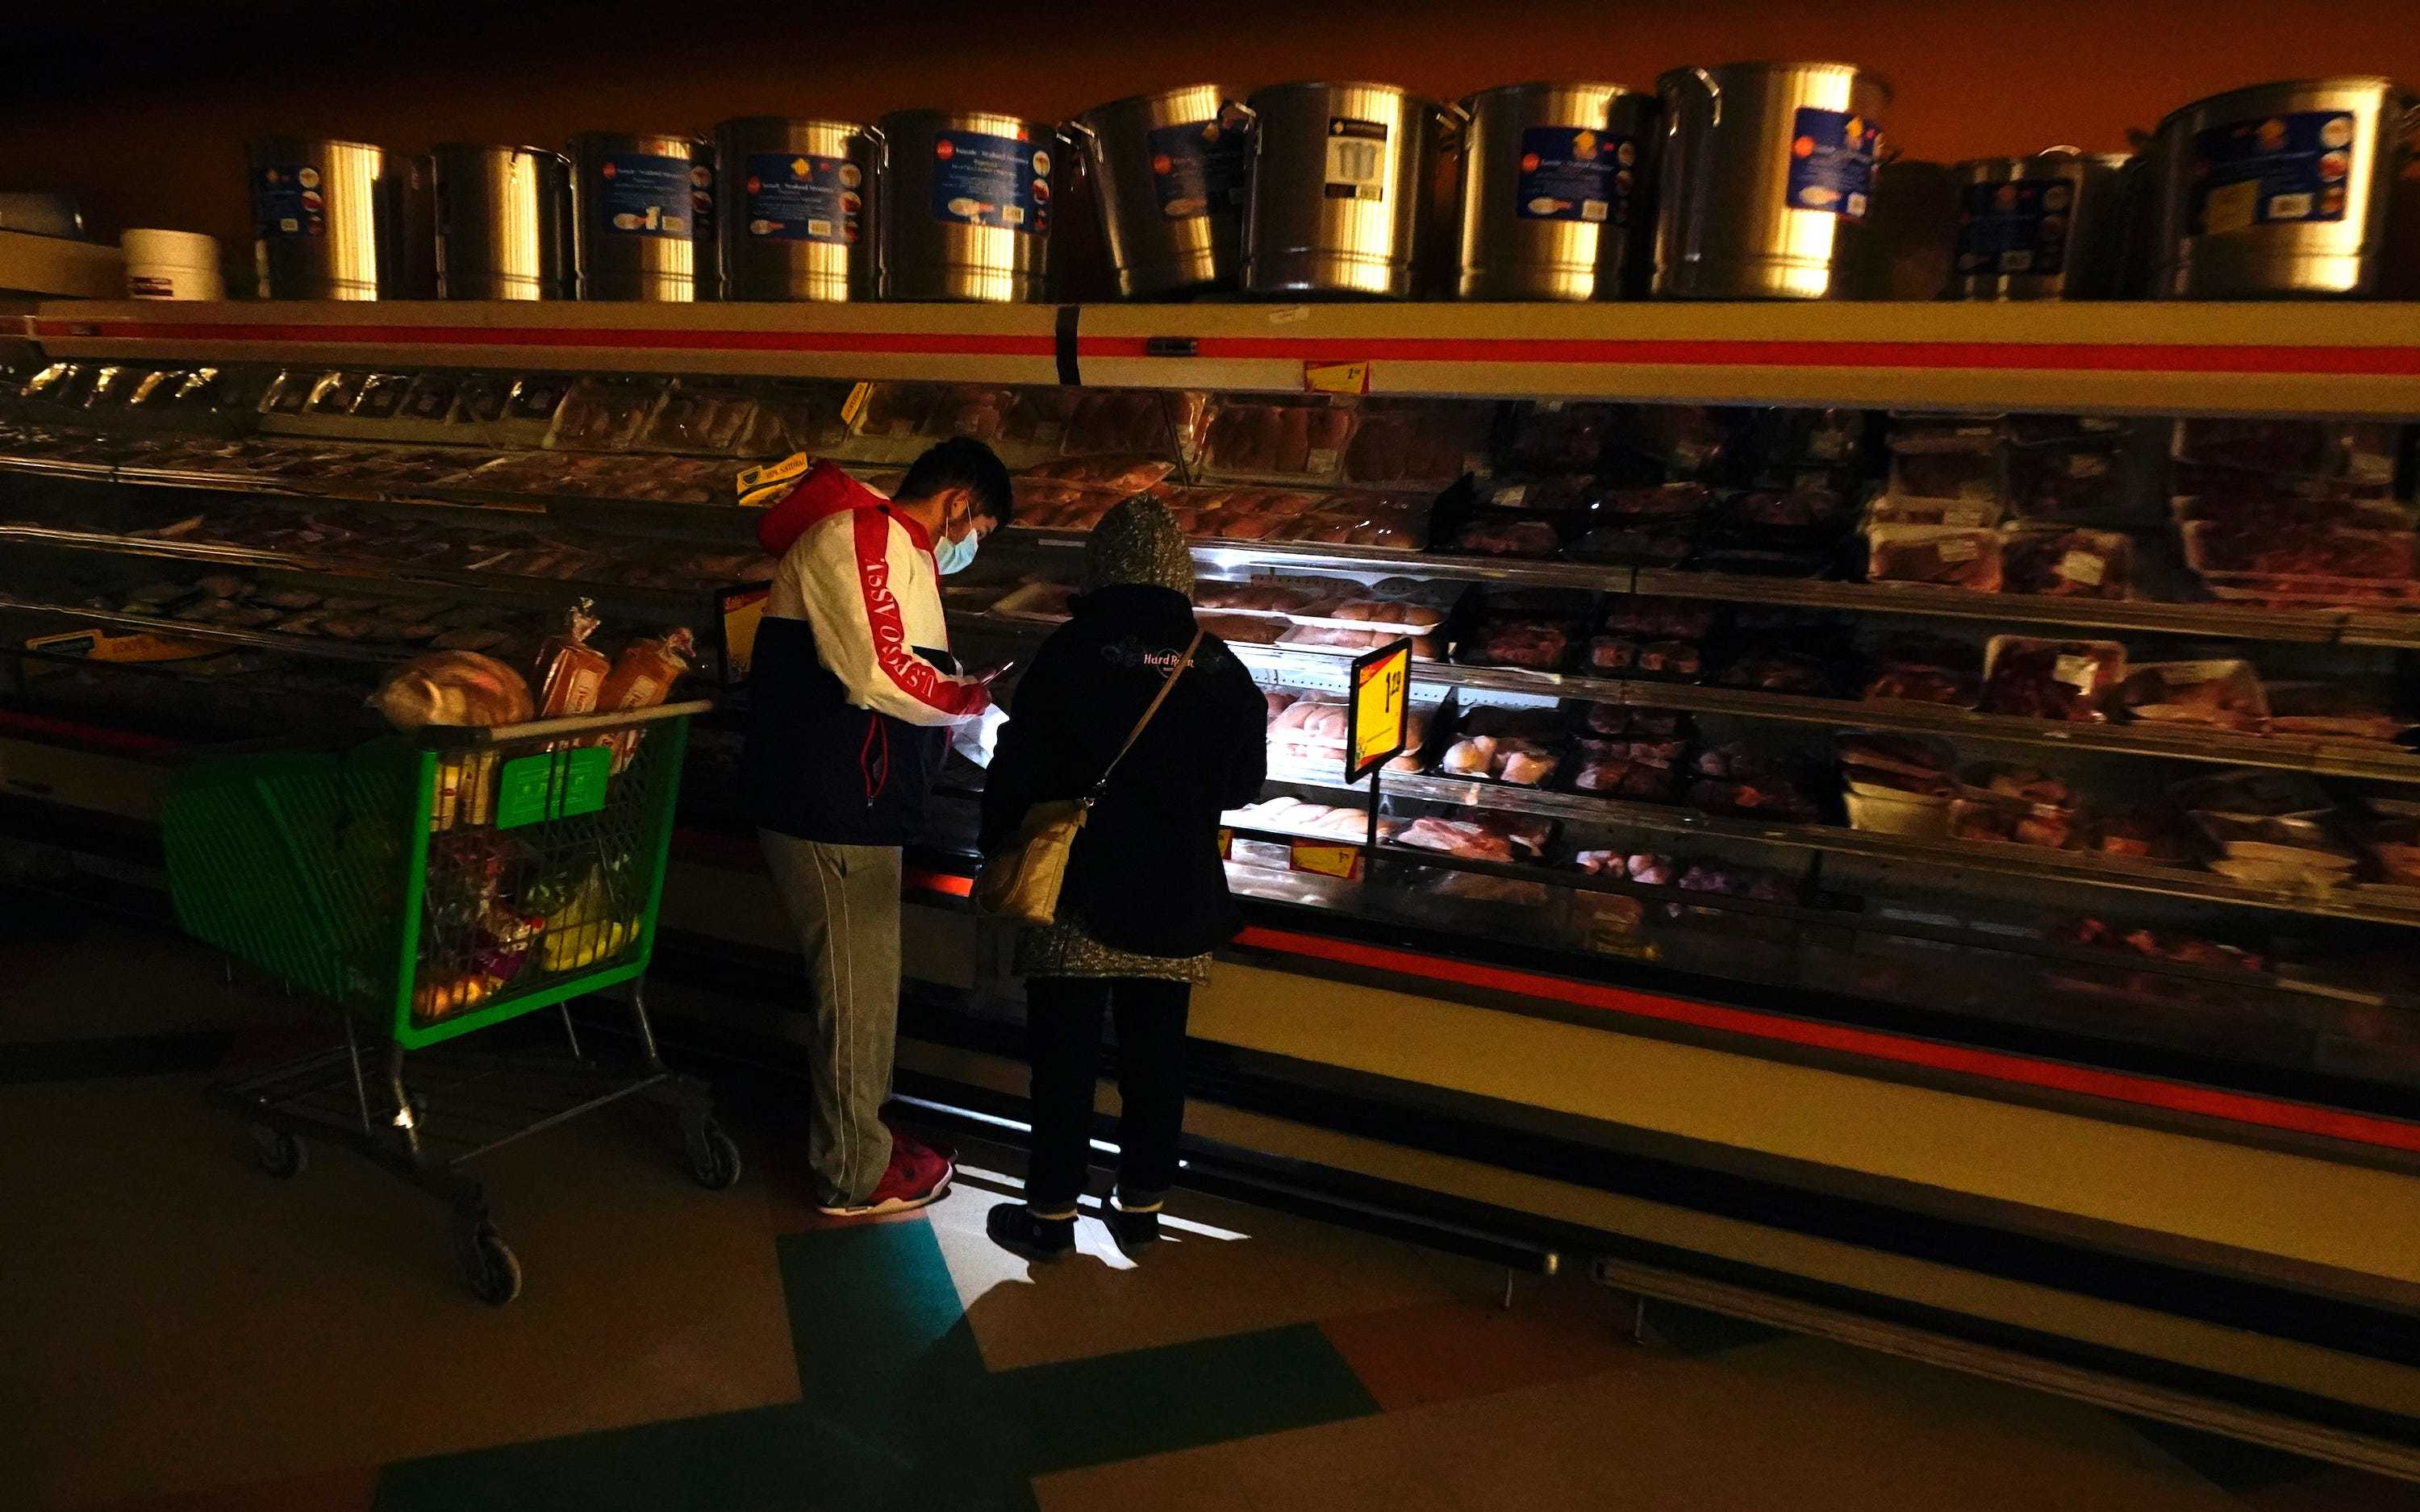 Customers use the light from a cell phone to look in the meat section of a grocery store Tuesday, Feb. 16, 2021, in Dallas. Even though the store lost power, it was open for cash only sales.